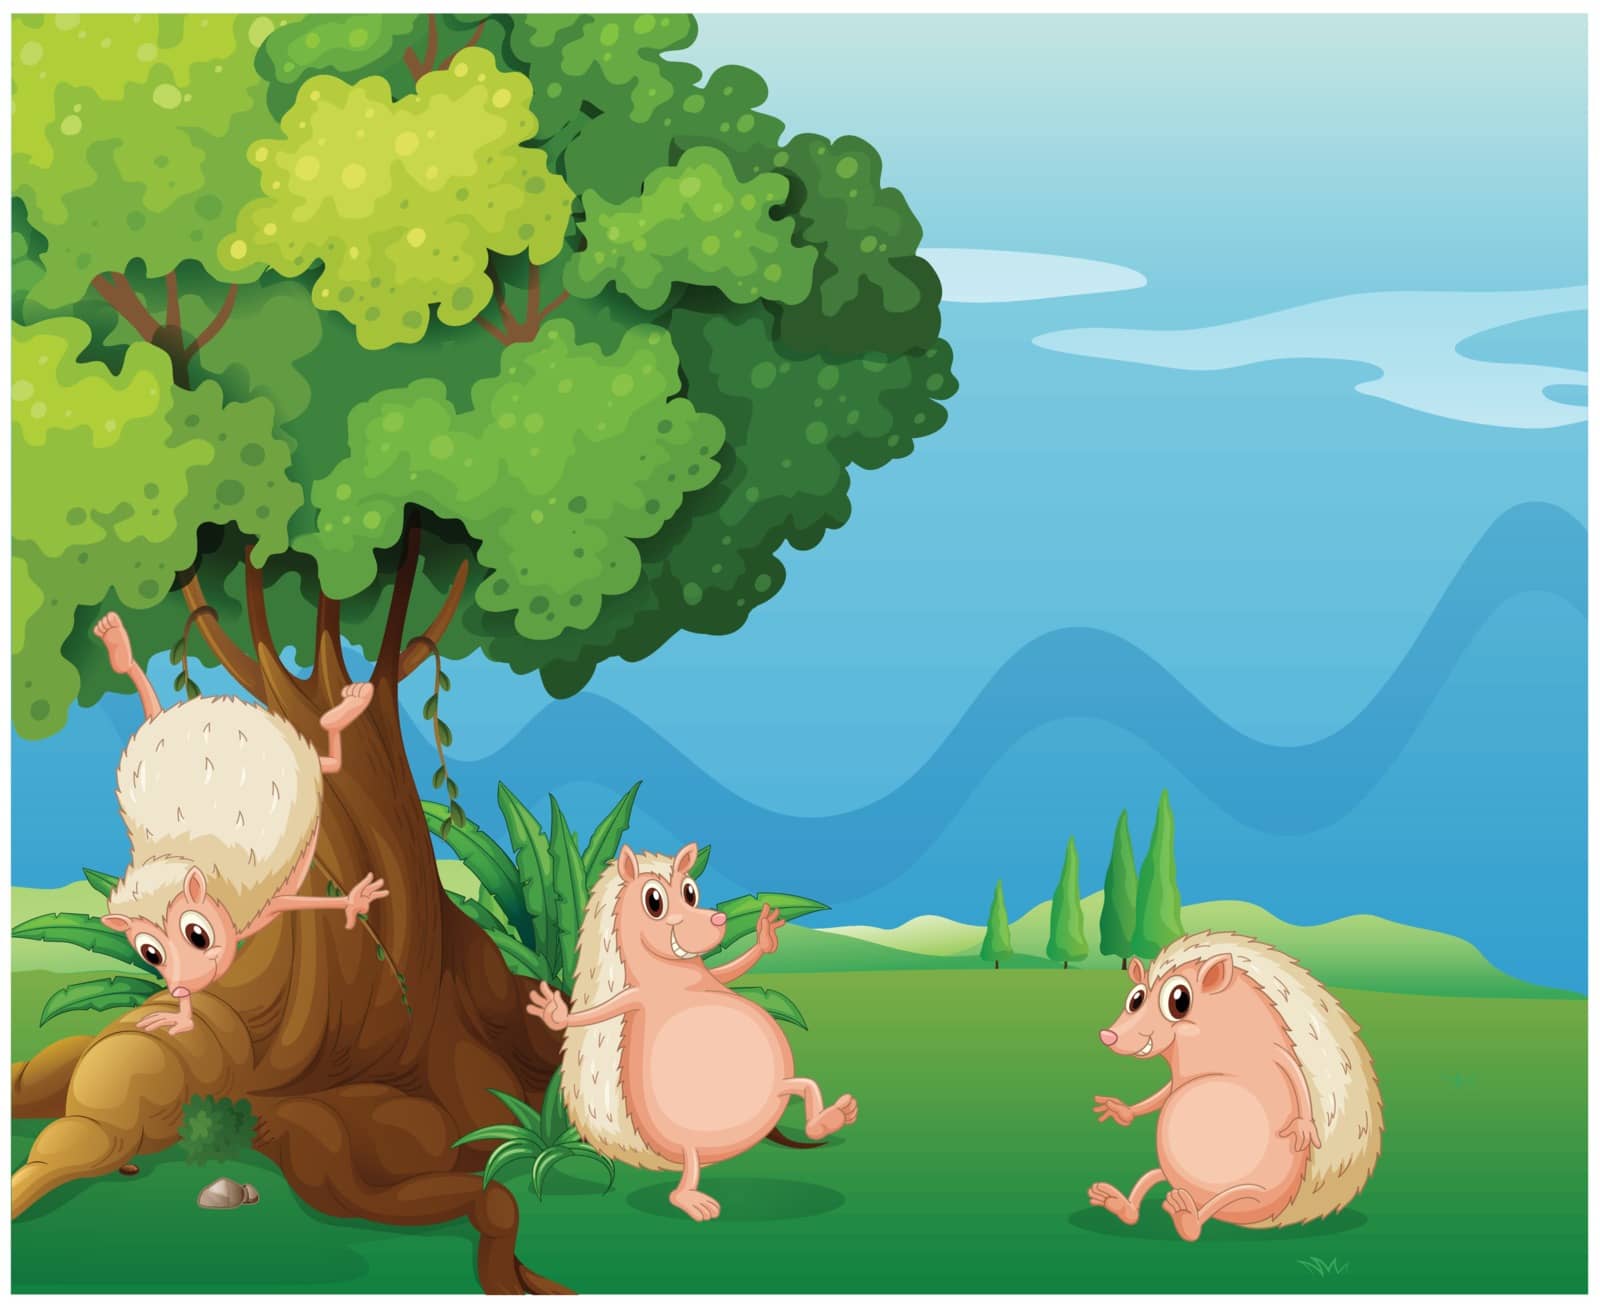 Illustration of the three playful molehogs near the old tree on a white background